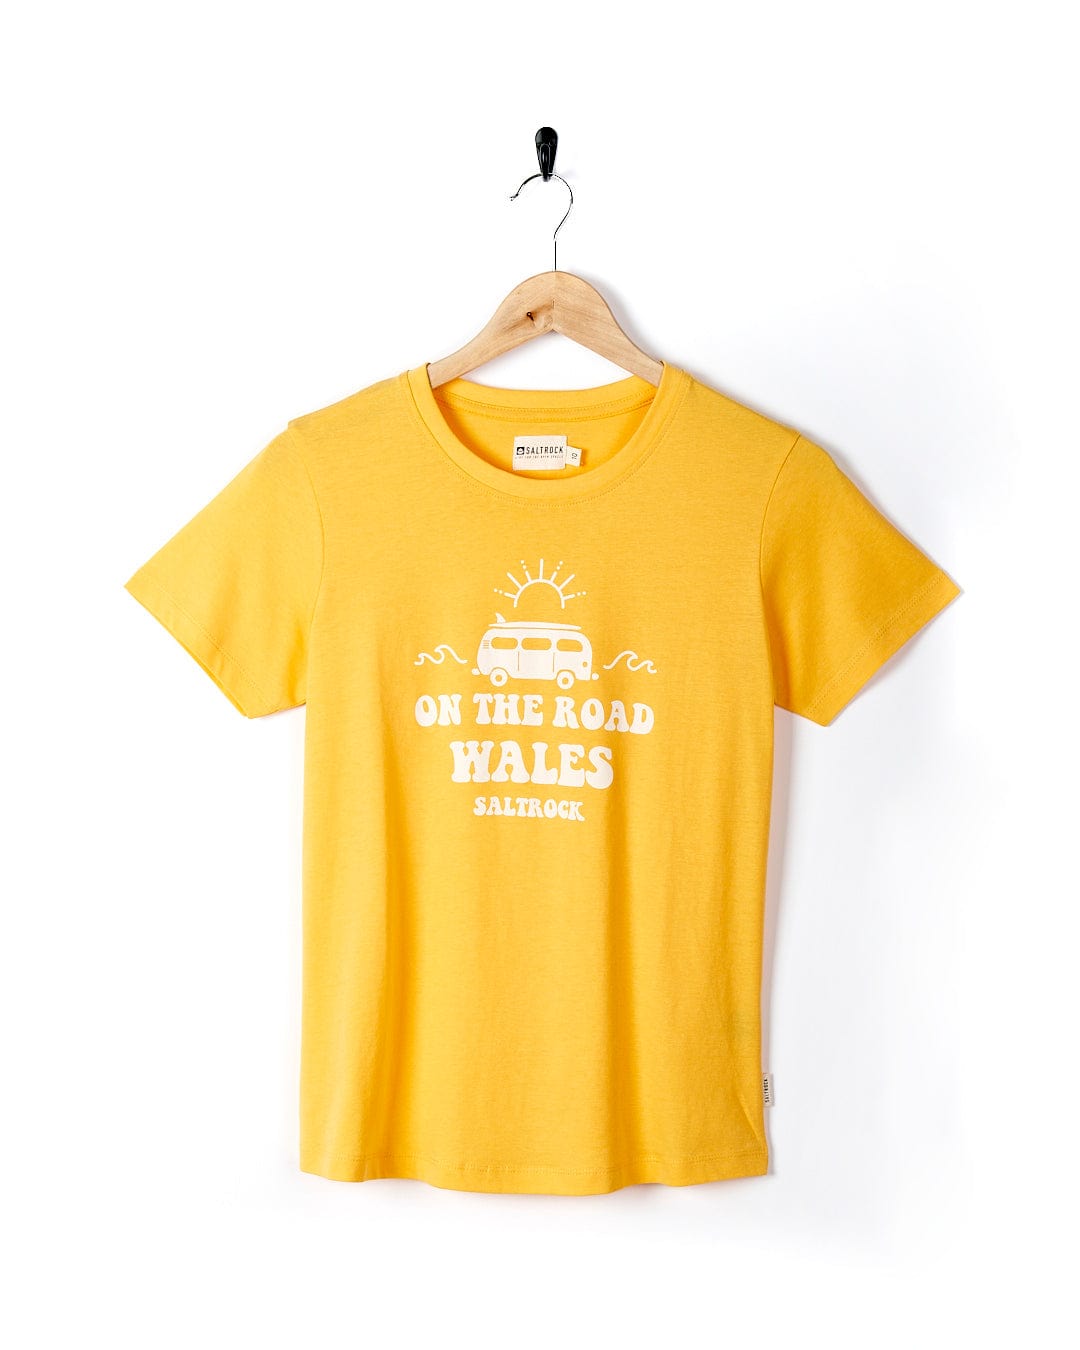 A Saltrock yellow t-shirt that says "On The Road Wales" holds